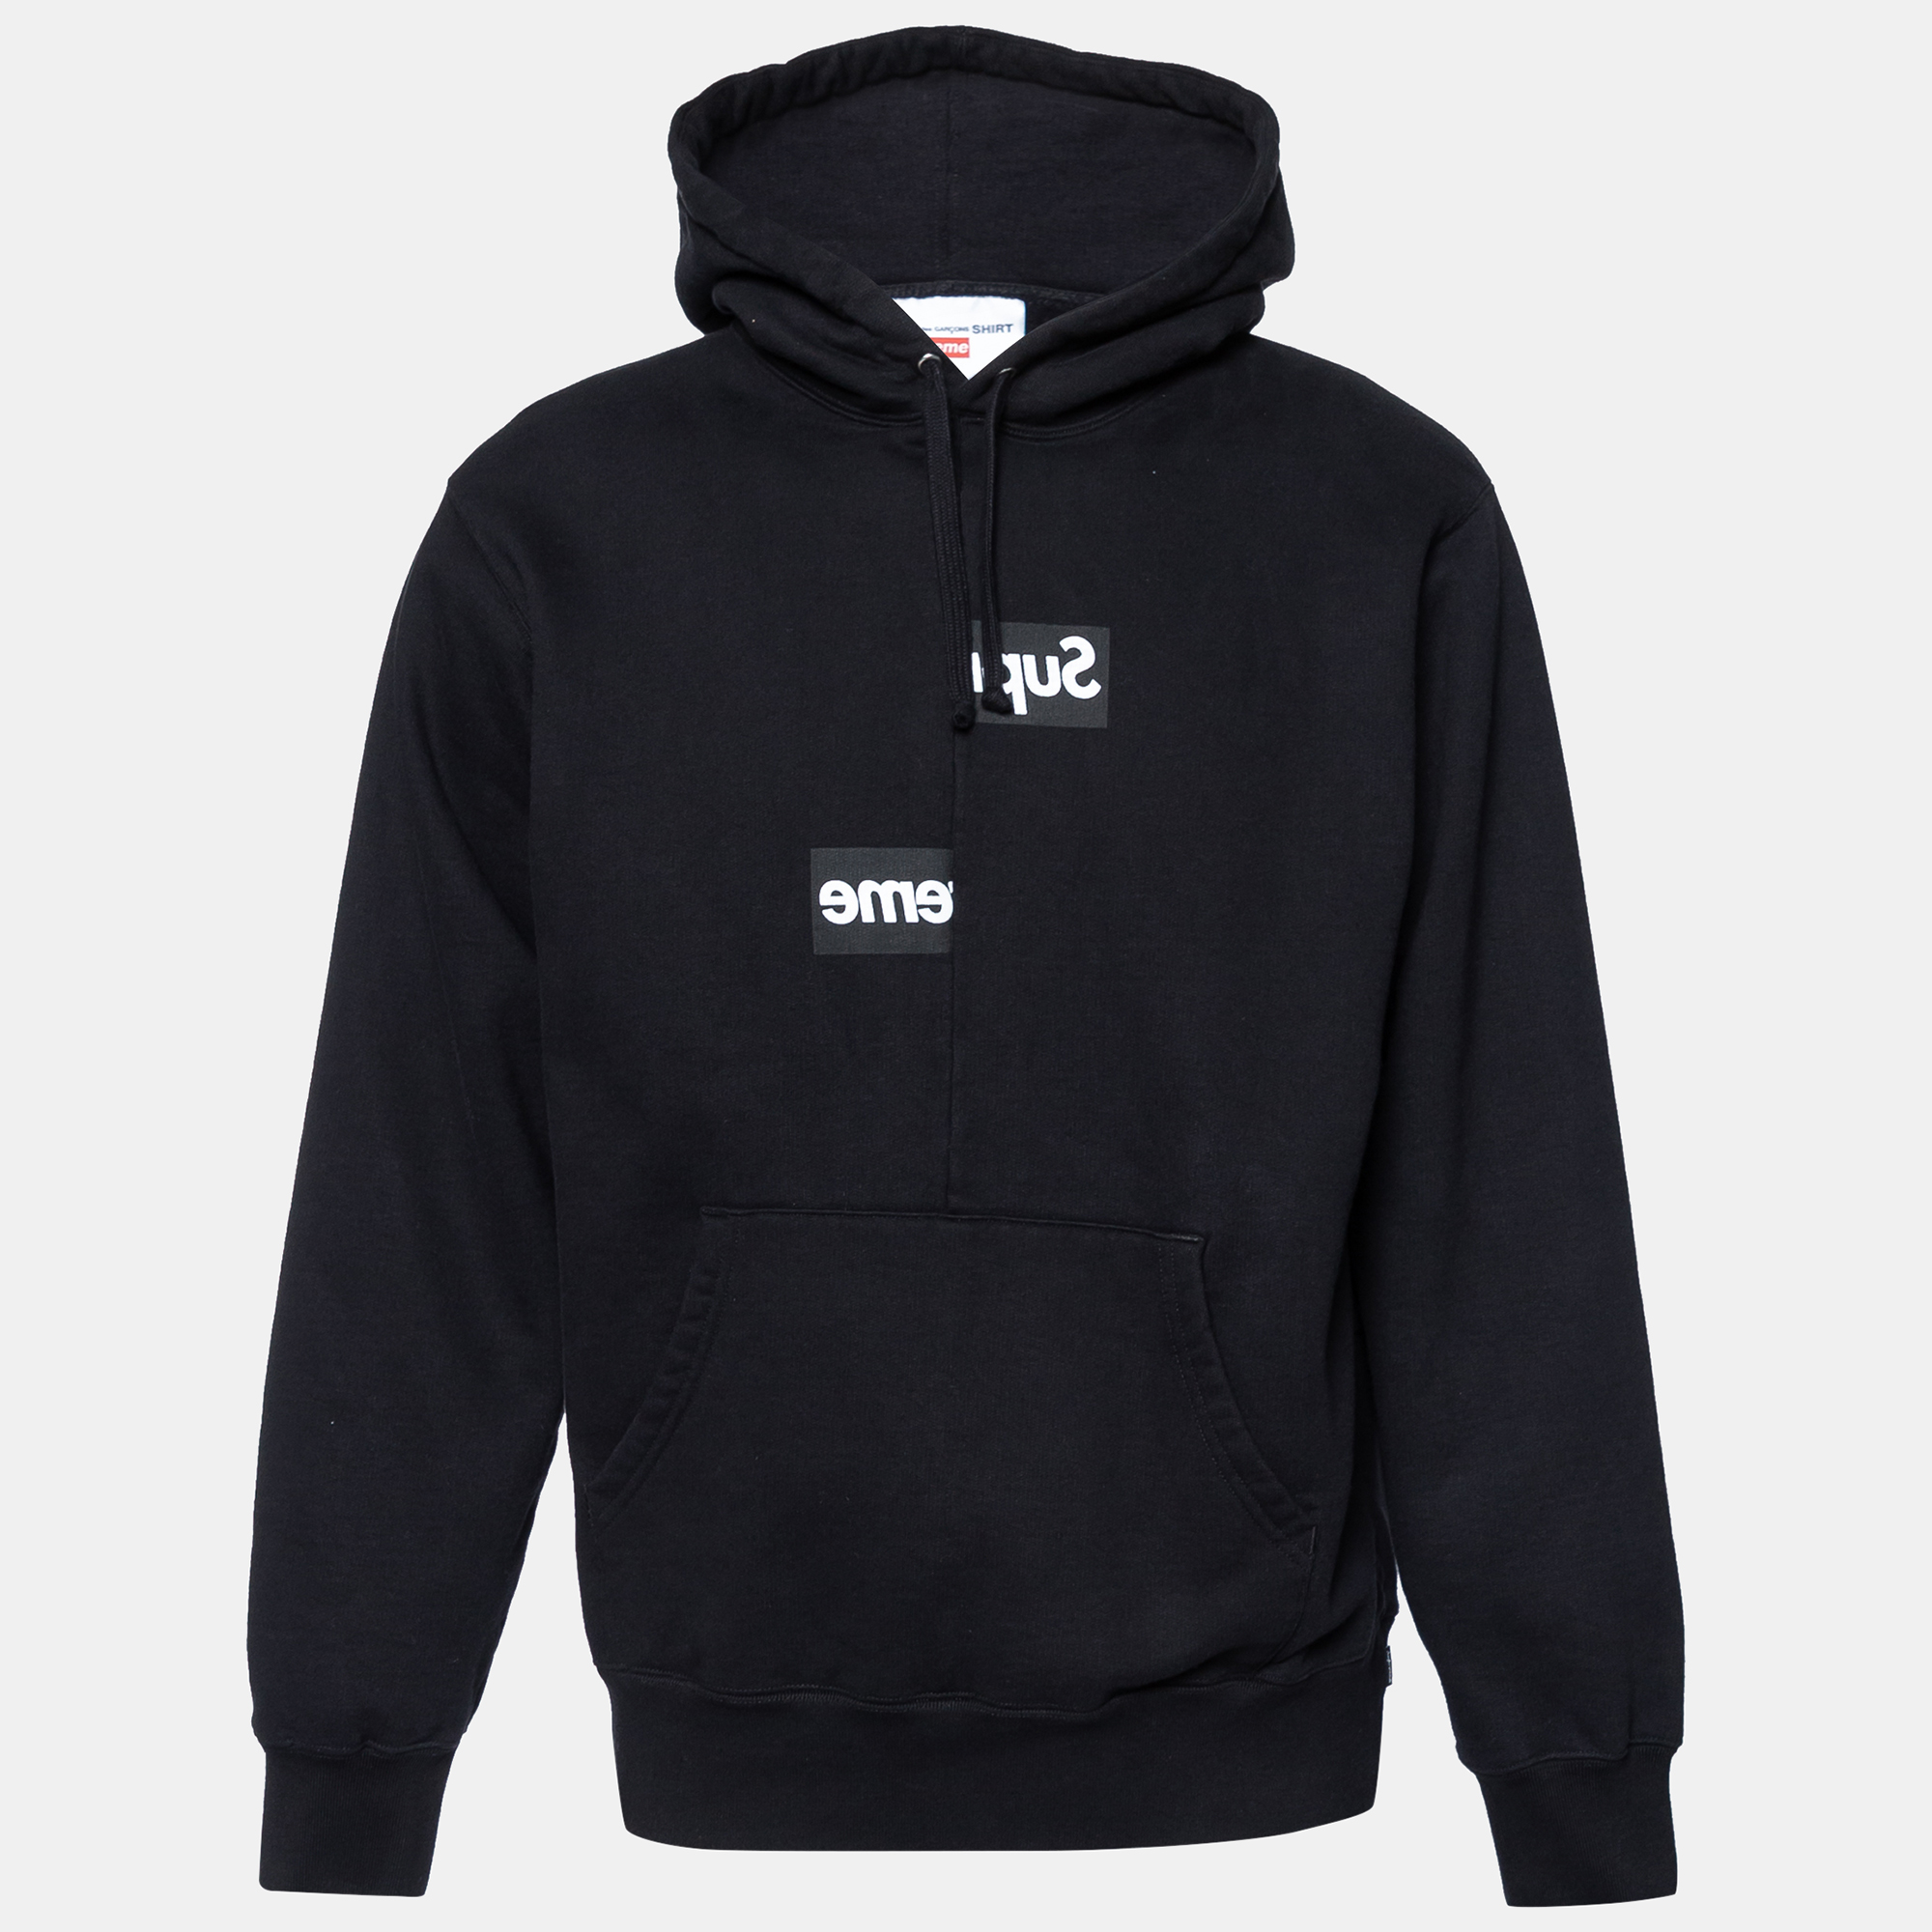 This hoodie from Supreme x Comme des Garçons is great for casual use and will help you stay comfortable. It is made from black terry knit fabric with split detailed logos elevating its look. It has long sleeves and one pocket. Match this hoodie with jeans and sneakers to sport a dapper style.